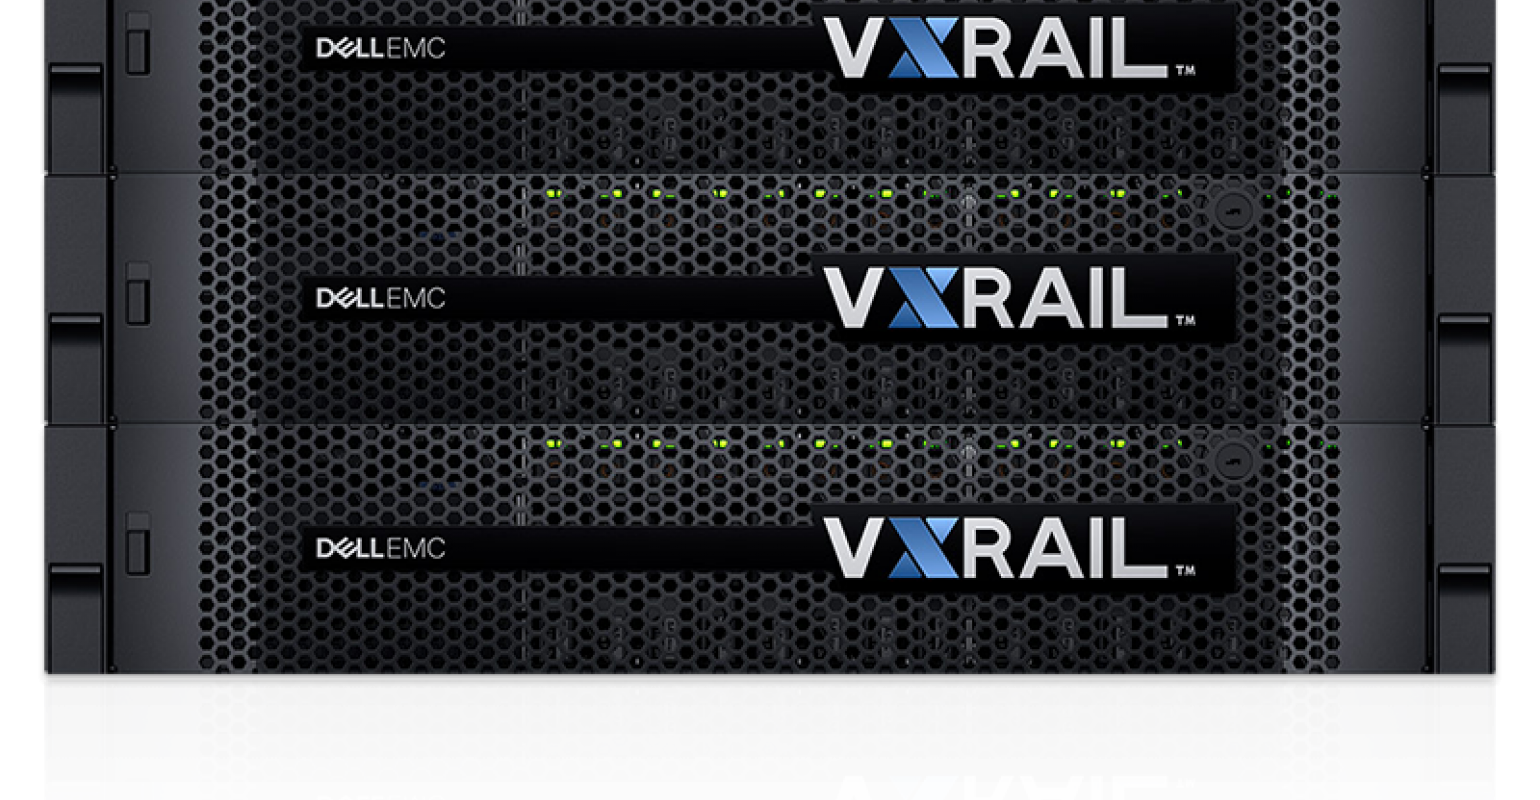 dellemc vxrail stack from pivit global